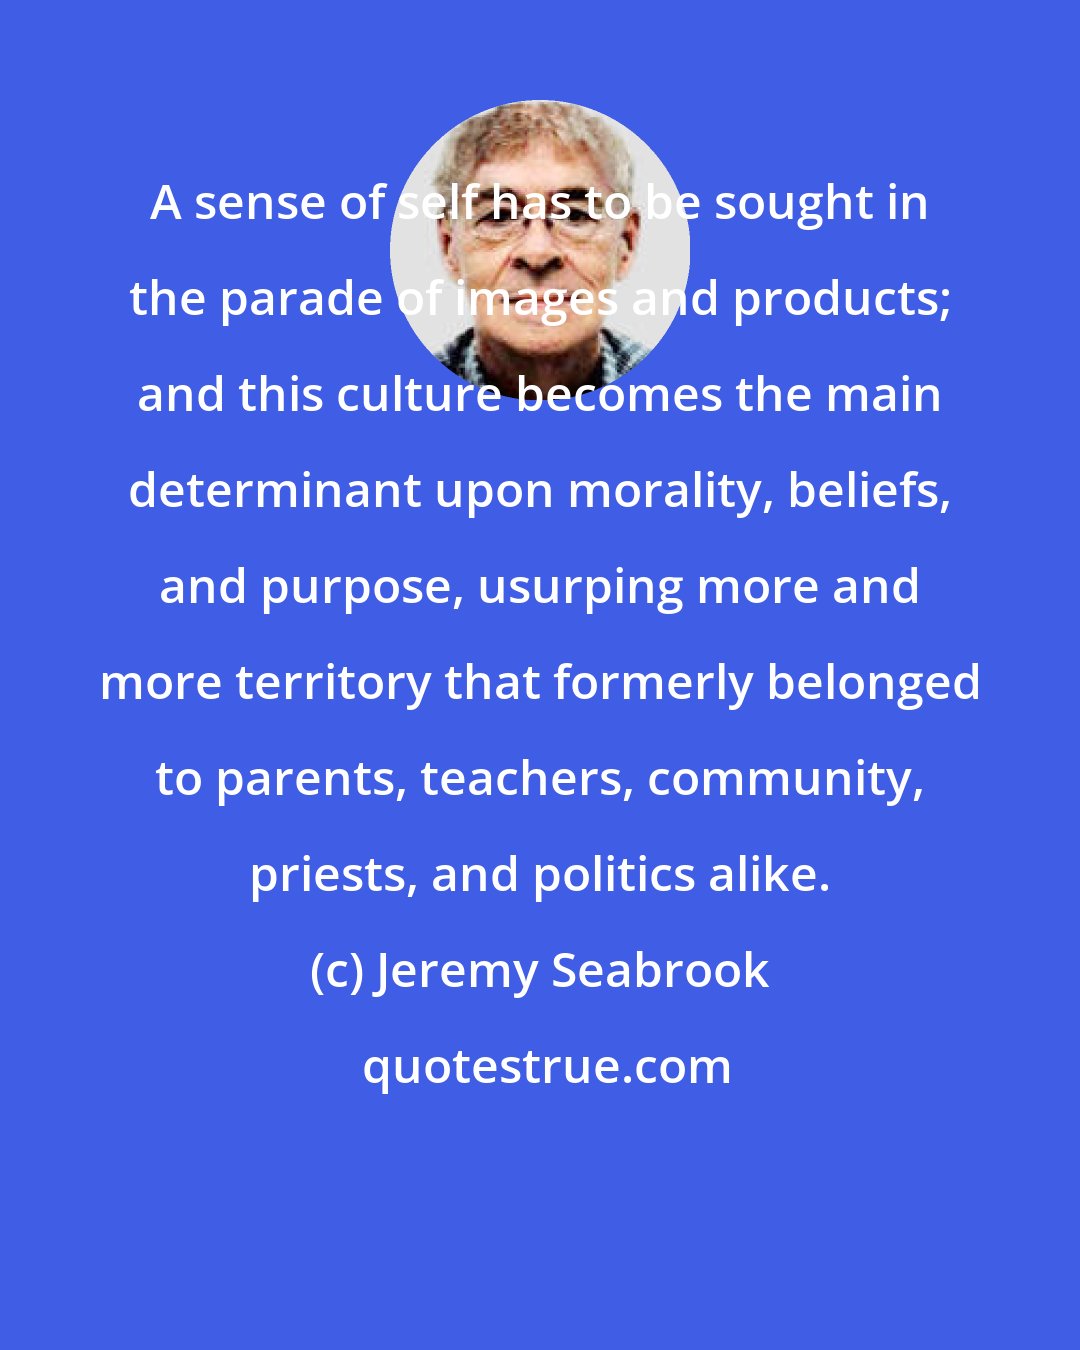 Jeremy Seabrook: A sense of self has to be sought in the parade of images and products; and this culture becomes the main determinant upon morality, beliefs, and purpose, usurping more and more territory that formerly belonged to parents, teachers, community, priests, and politics alike.